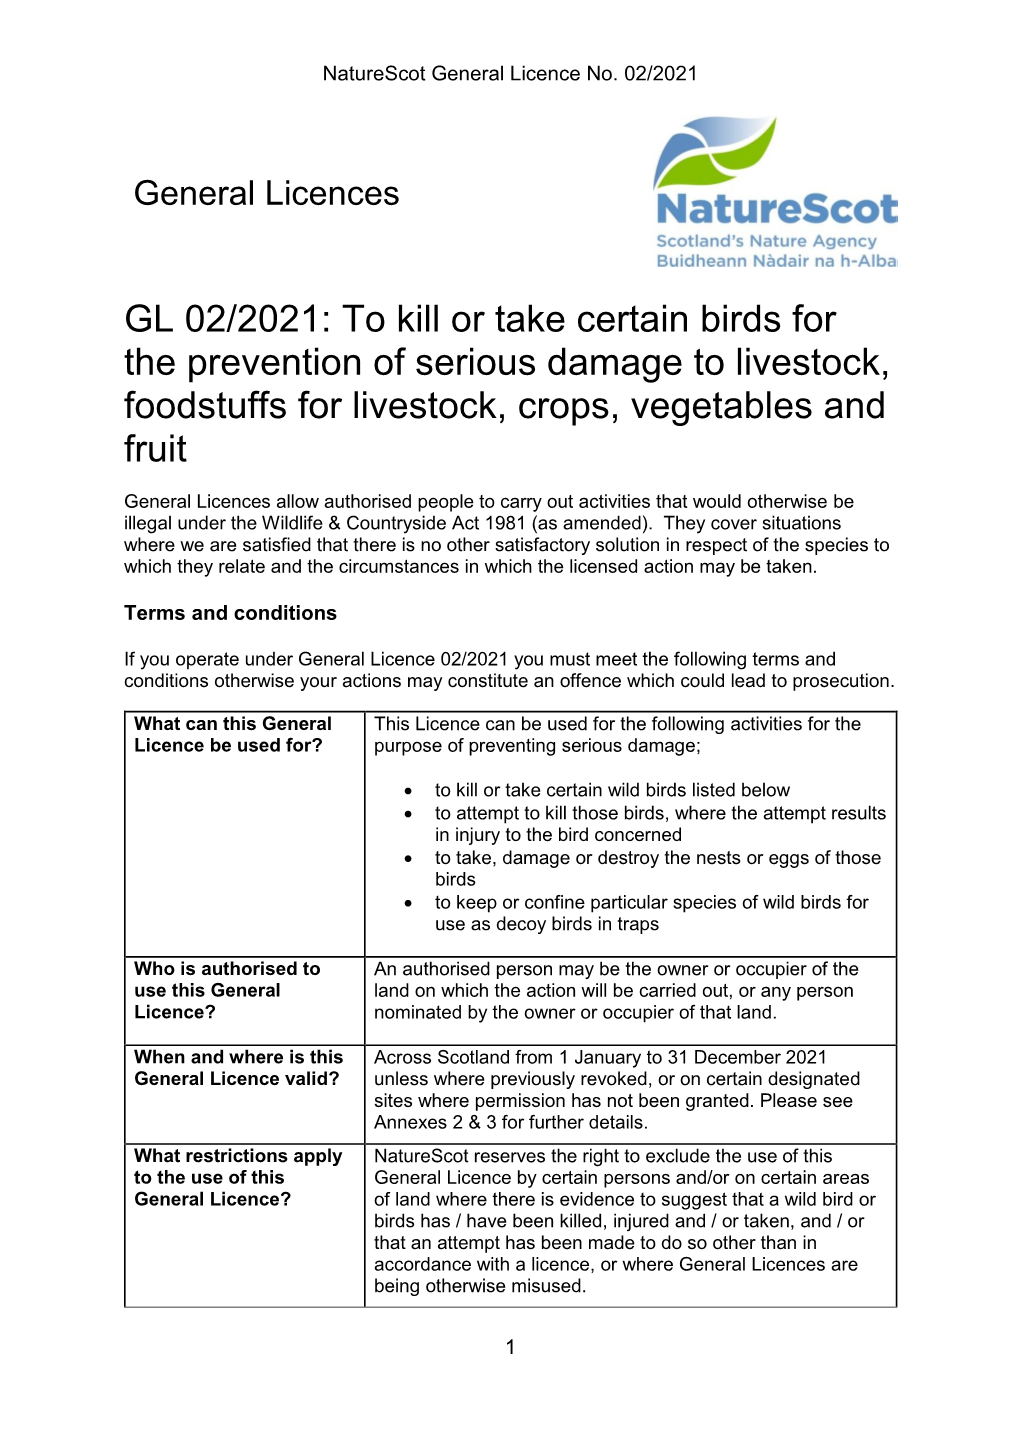 GL 02/2021: to Kill Or Take Certain Birds for the Prevention of Serious Damage to Livestock, Foodstuffs for Livestock, Crops, Vegetables and Fruit